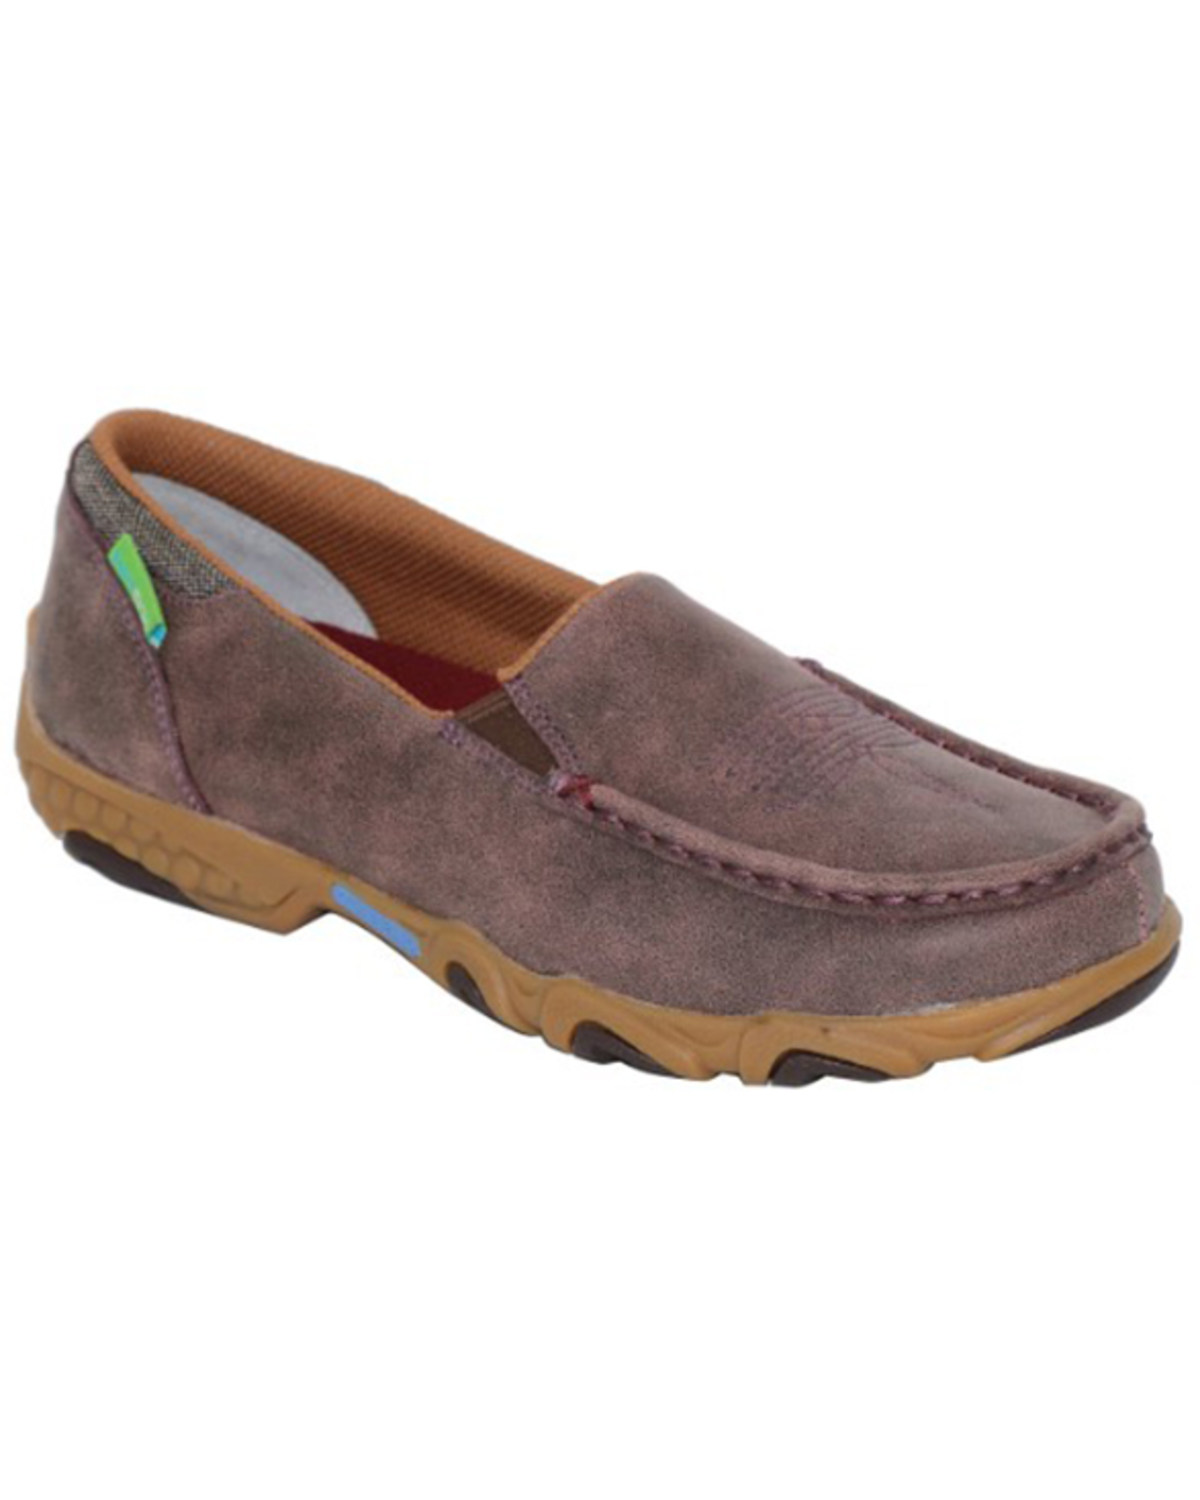 Twisted X Women's Slip-On Driving Moccasin - Moc Toe